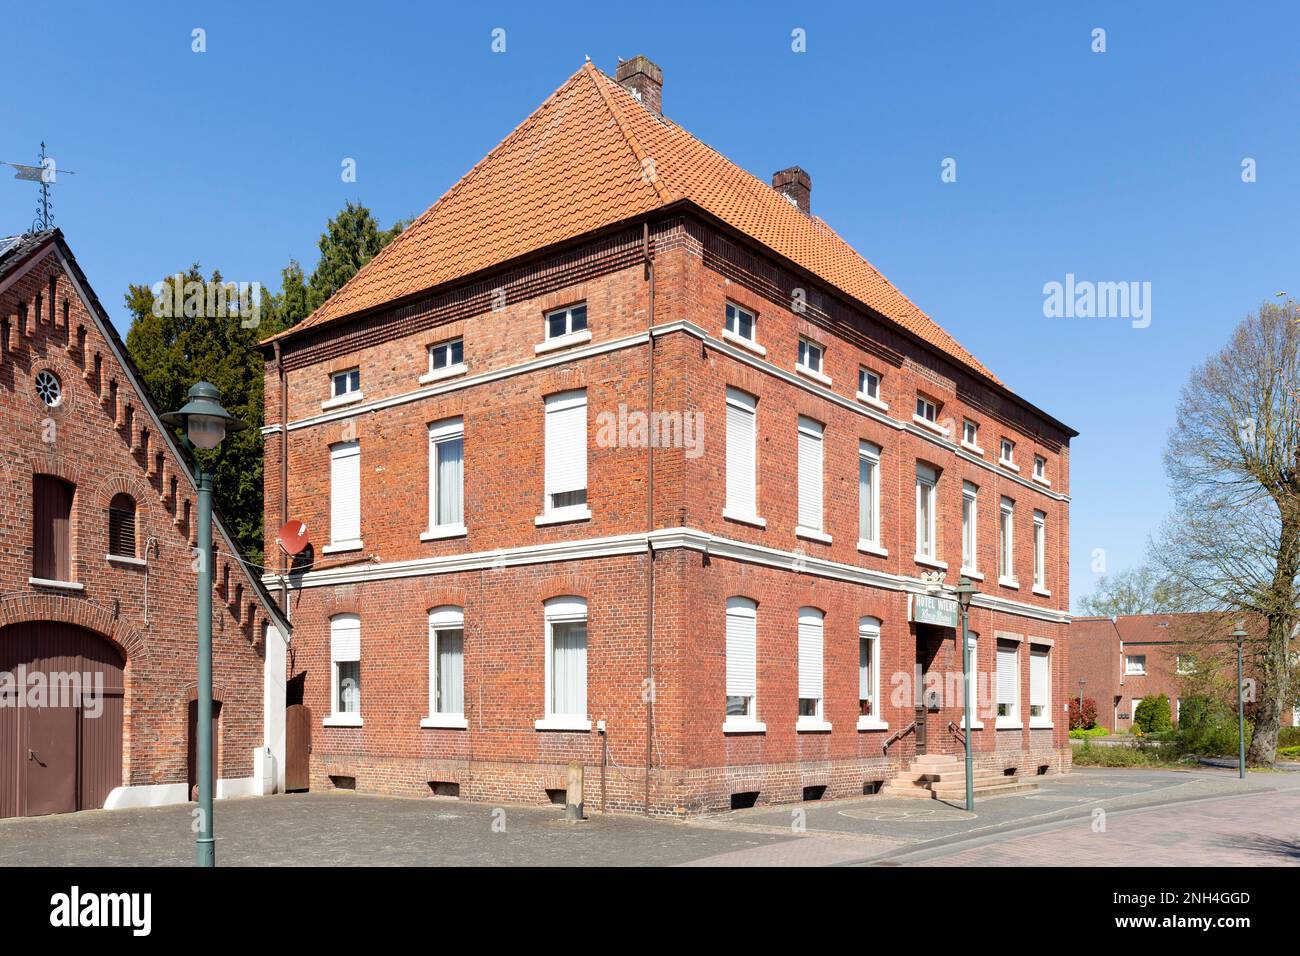 Former agricultural property or hotel with solar plant, Oeding, Suedlohn, Muensterland, North Rhine-Westphalia, Germany Stock Photo